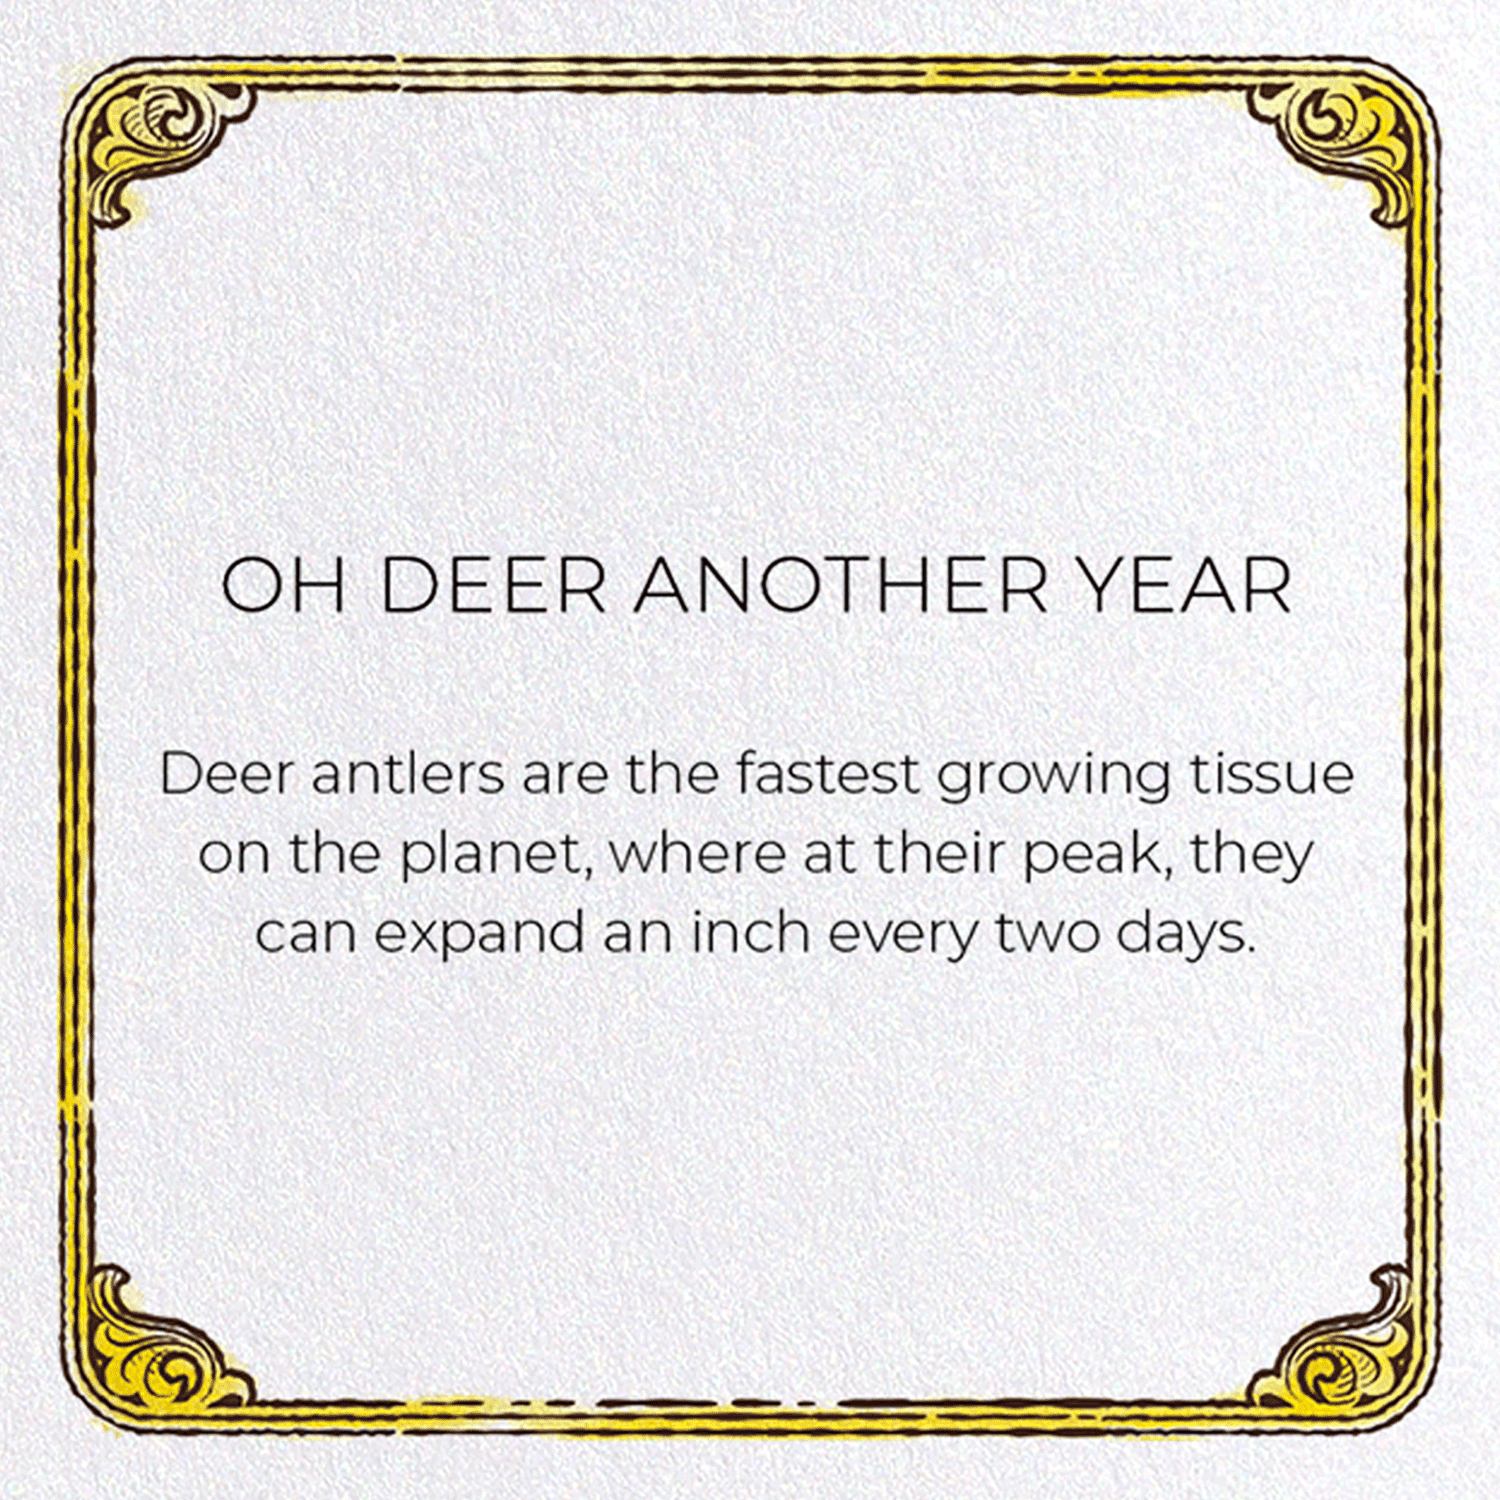 OH DEER ANOTHER YEAR